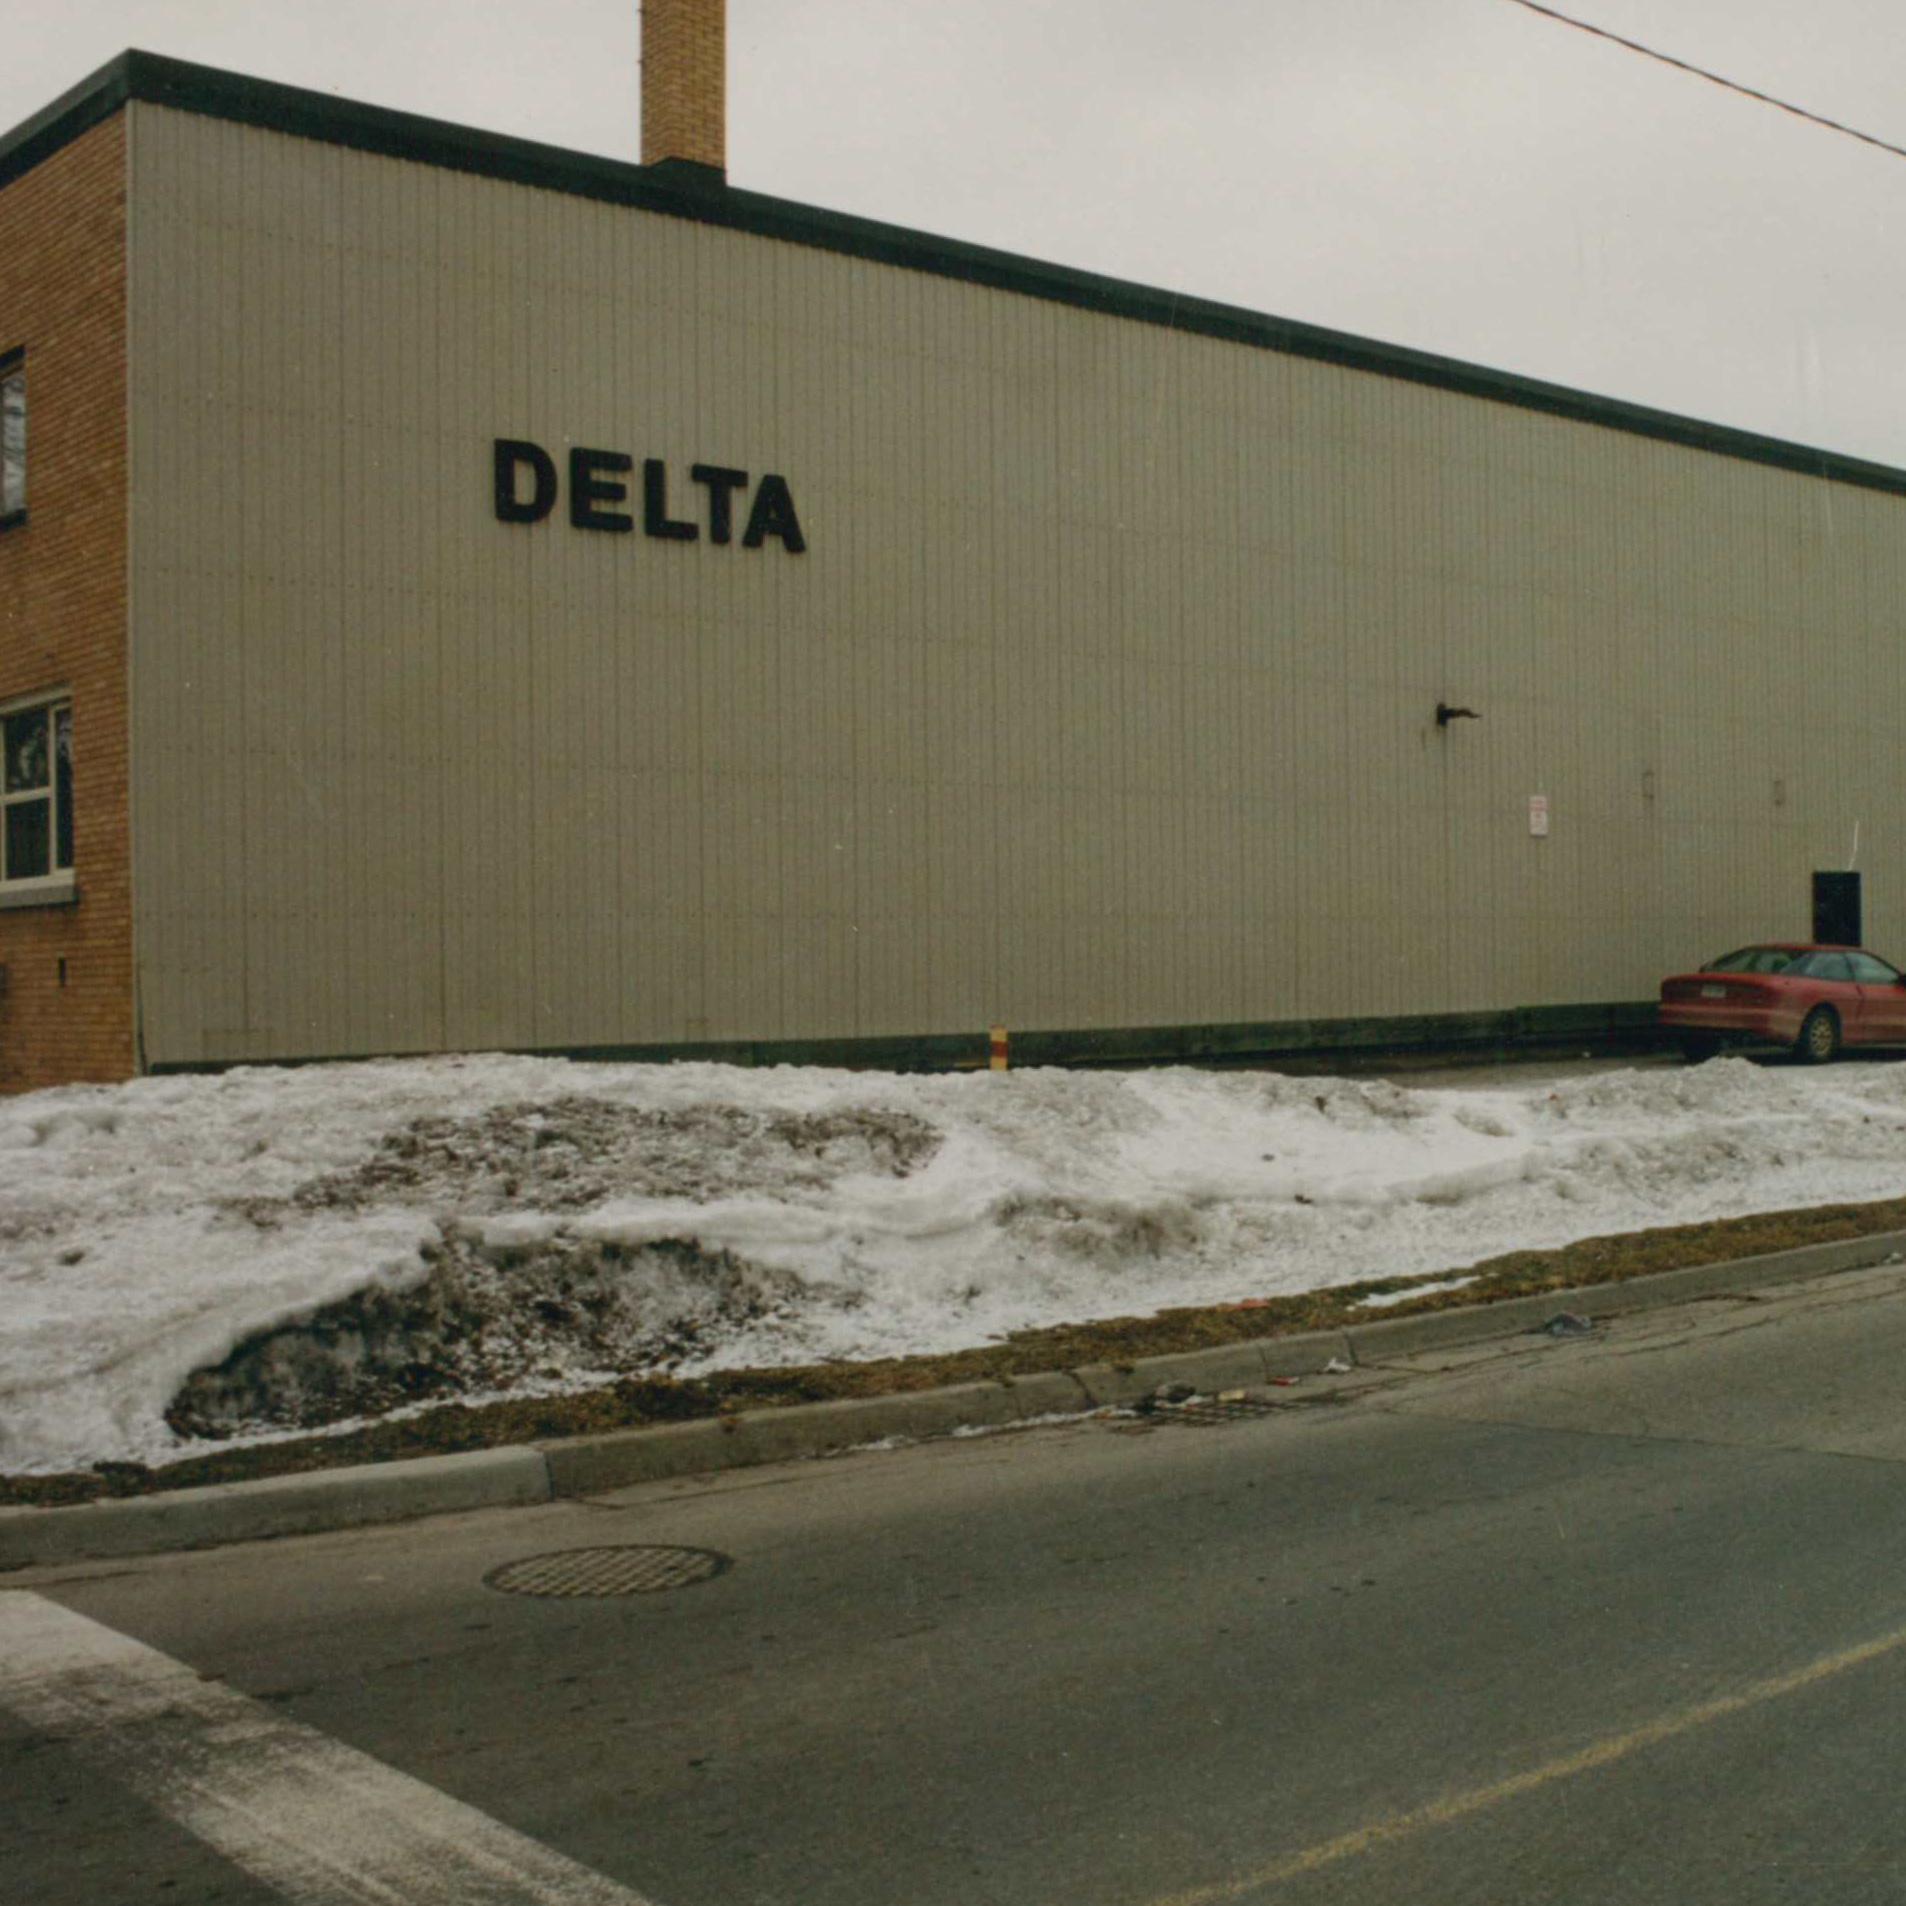 Delta Elevator Office at 97 Leger St - large beige building, snow on the ground in front